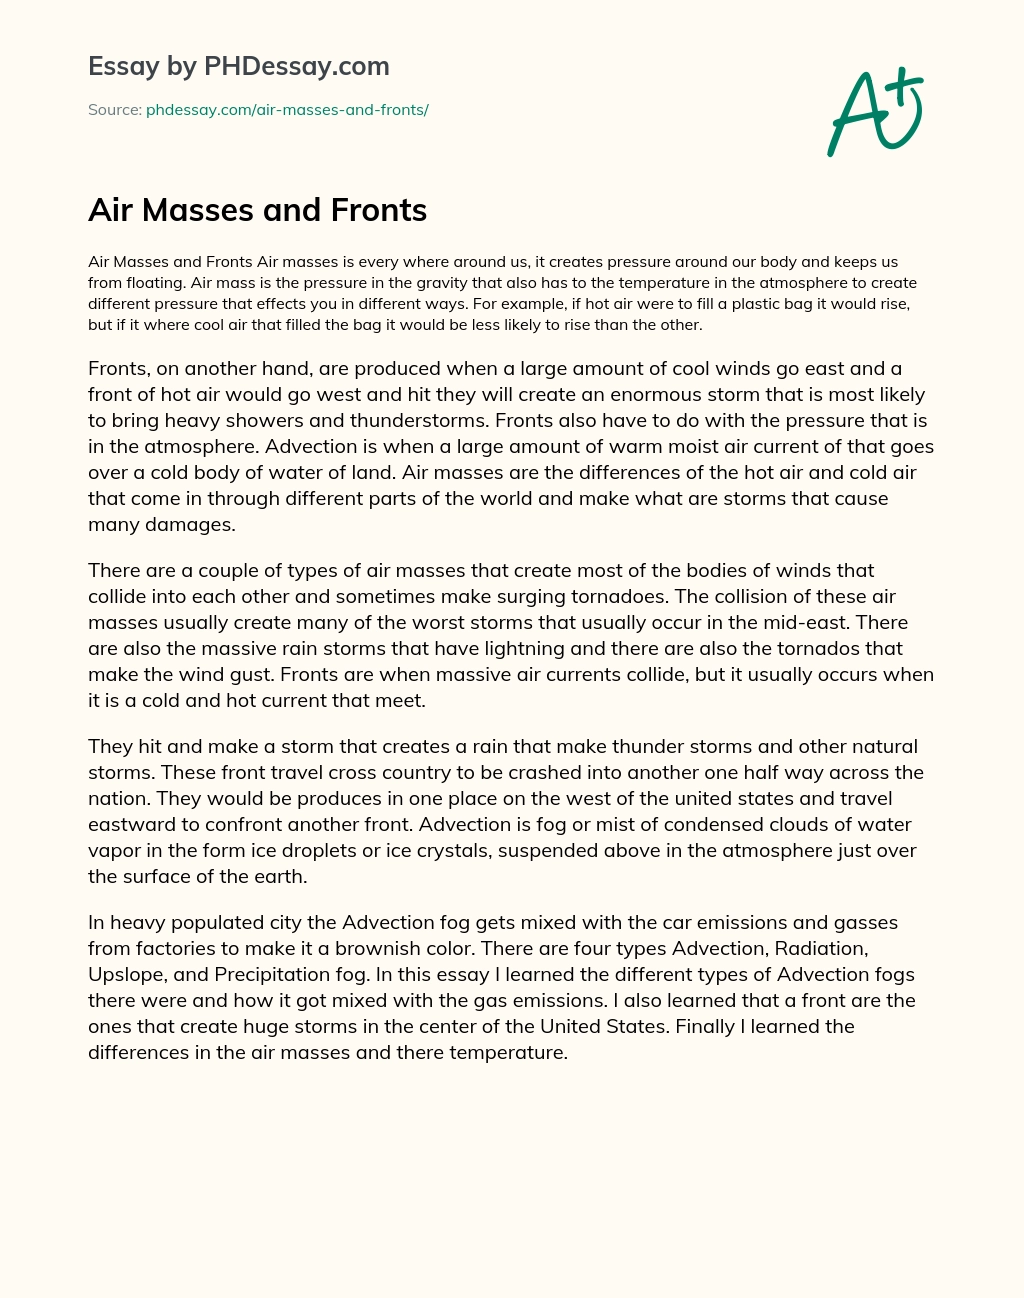 Air Masses and Fronts essay